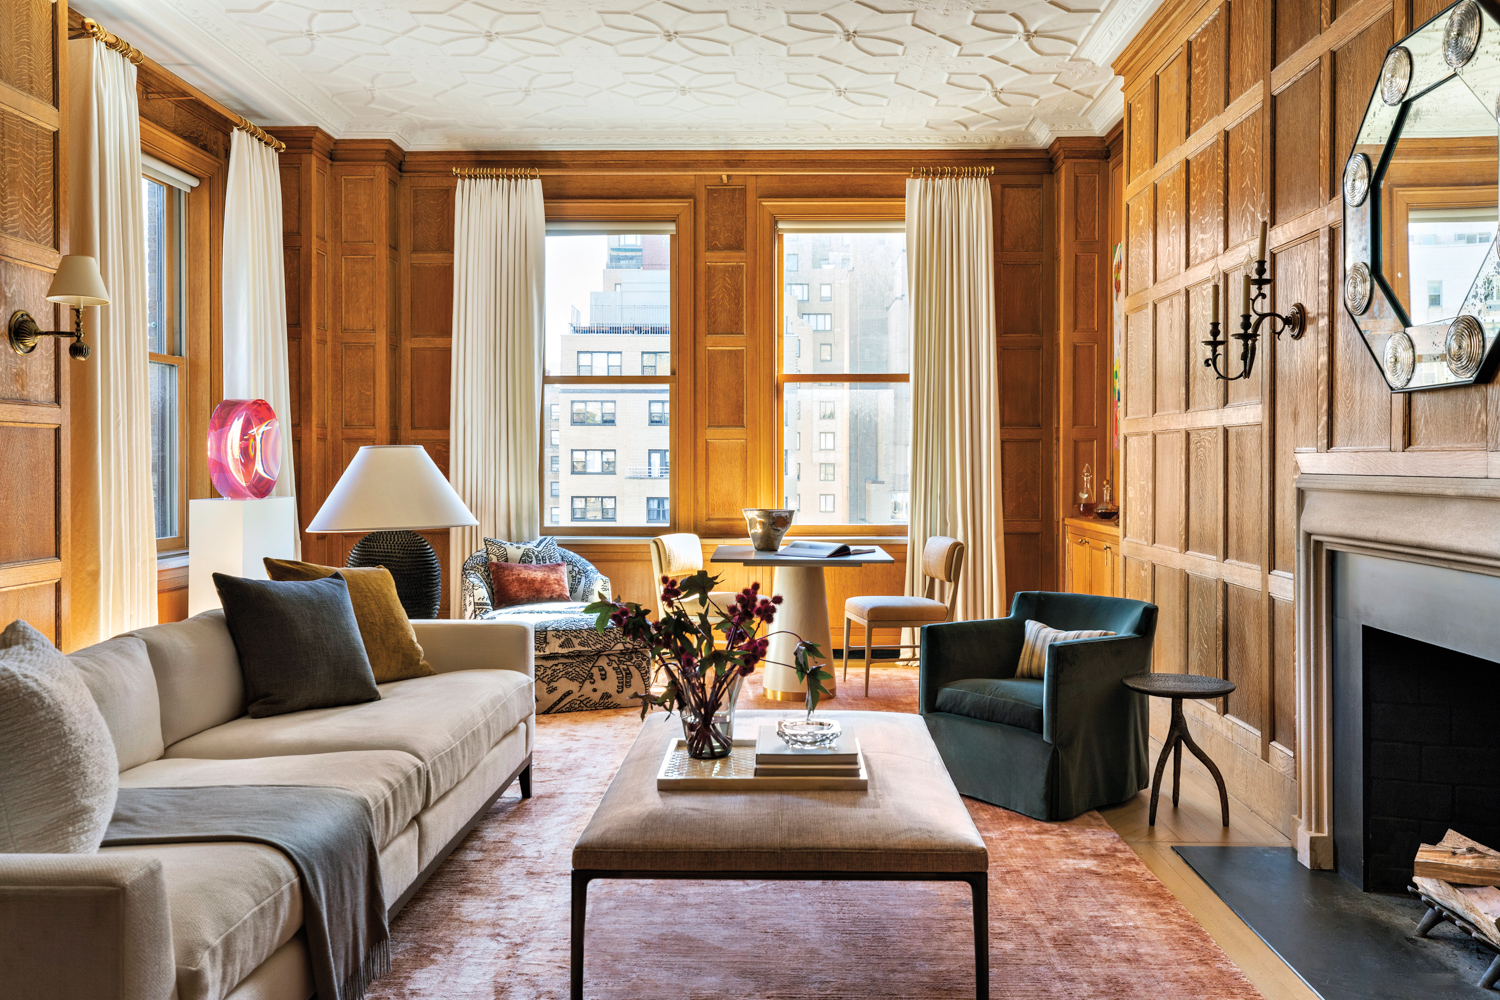 It’s A Perfect Juxtaposition Of Styles In This New York Apartment